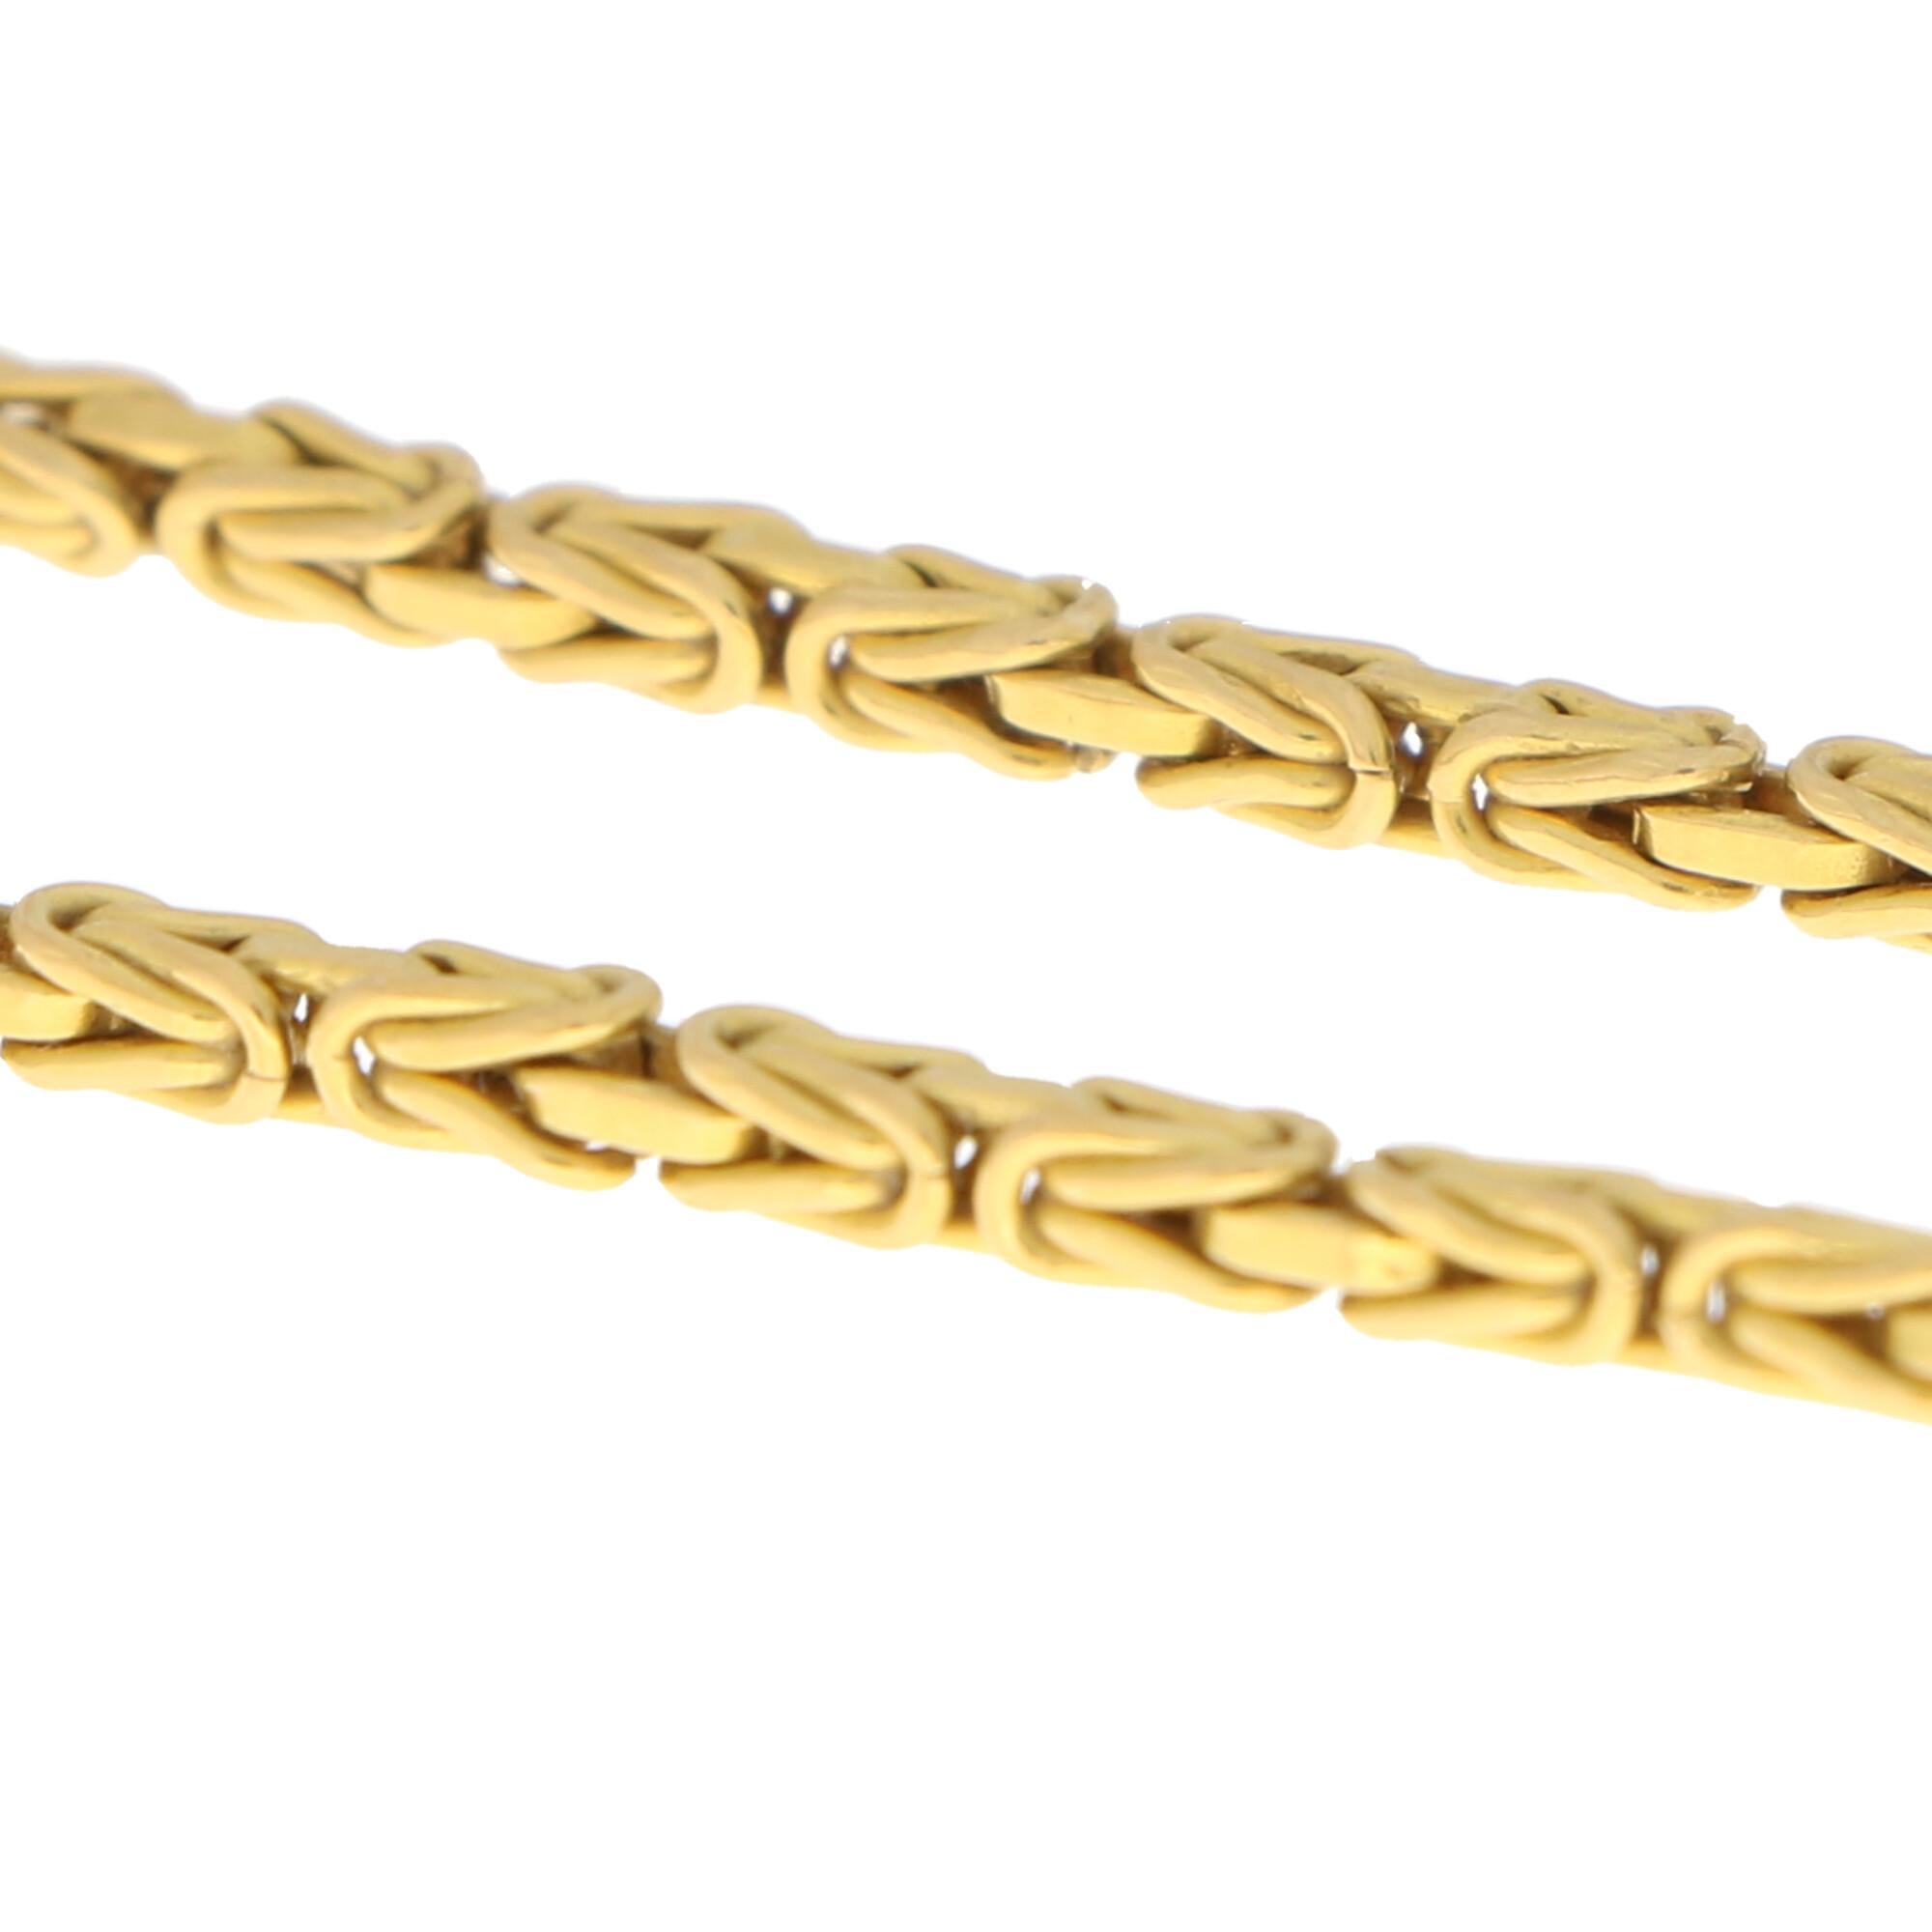 Retro Vintage Chaumet Etruscan Style Chain Set in 18k Yellow Gold